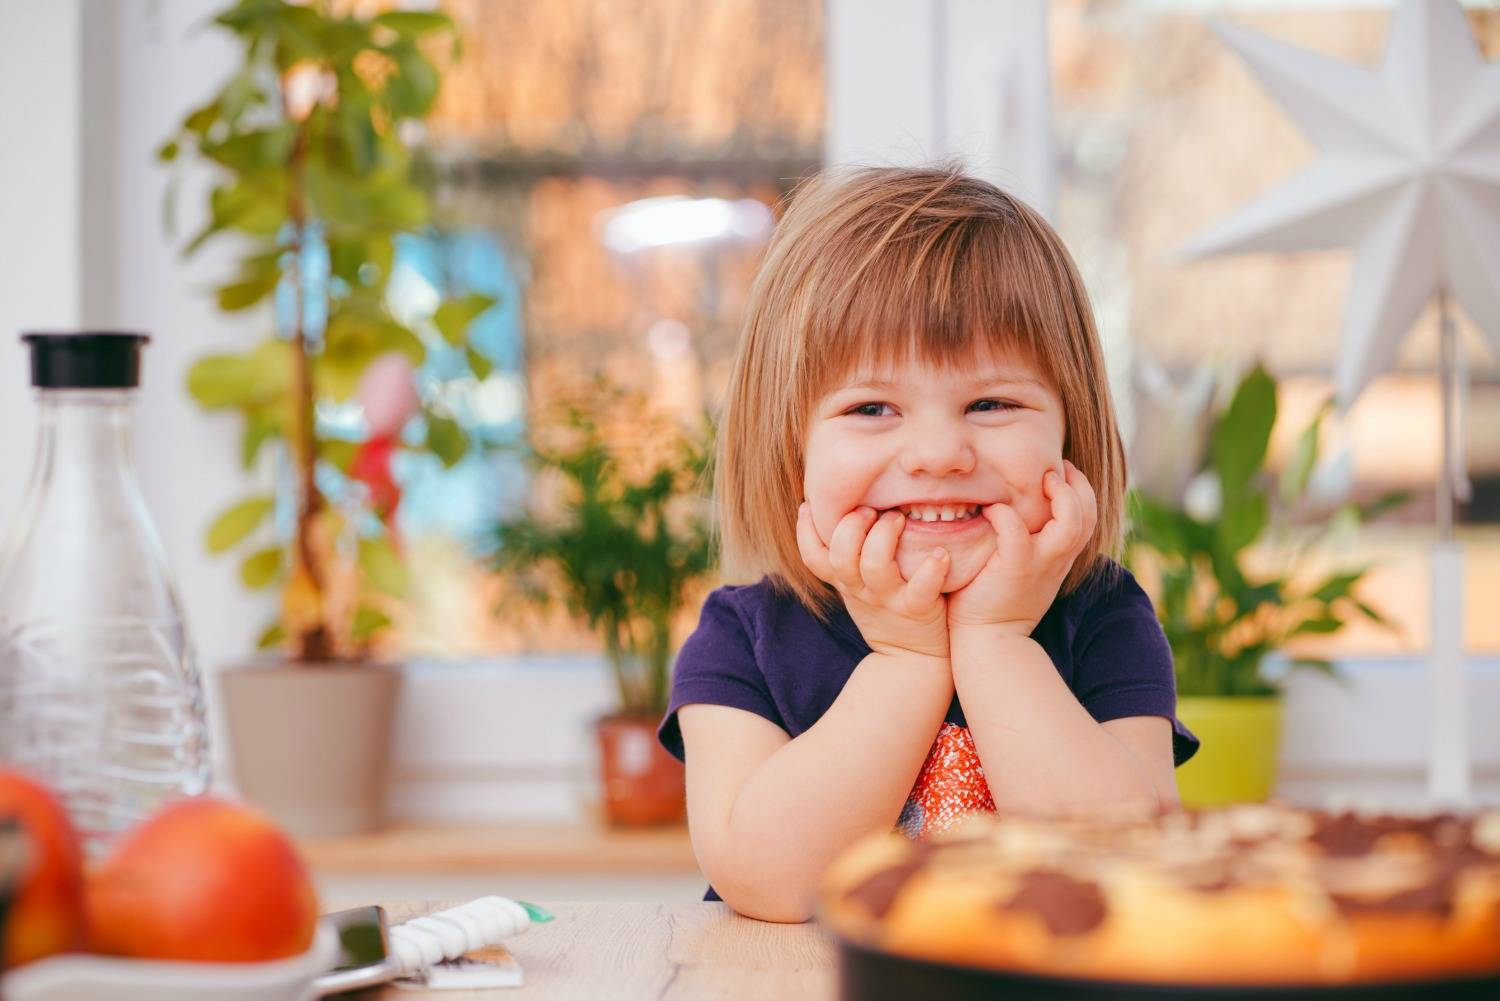 Child Sitting At The Table Smiling